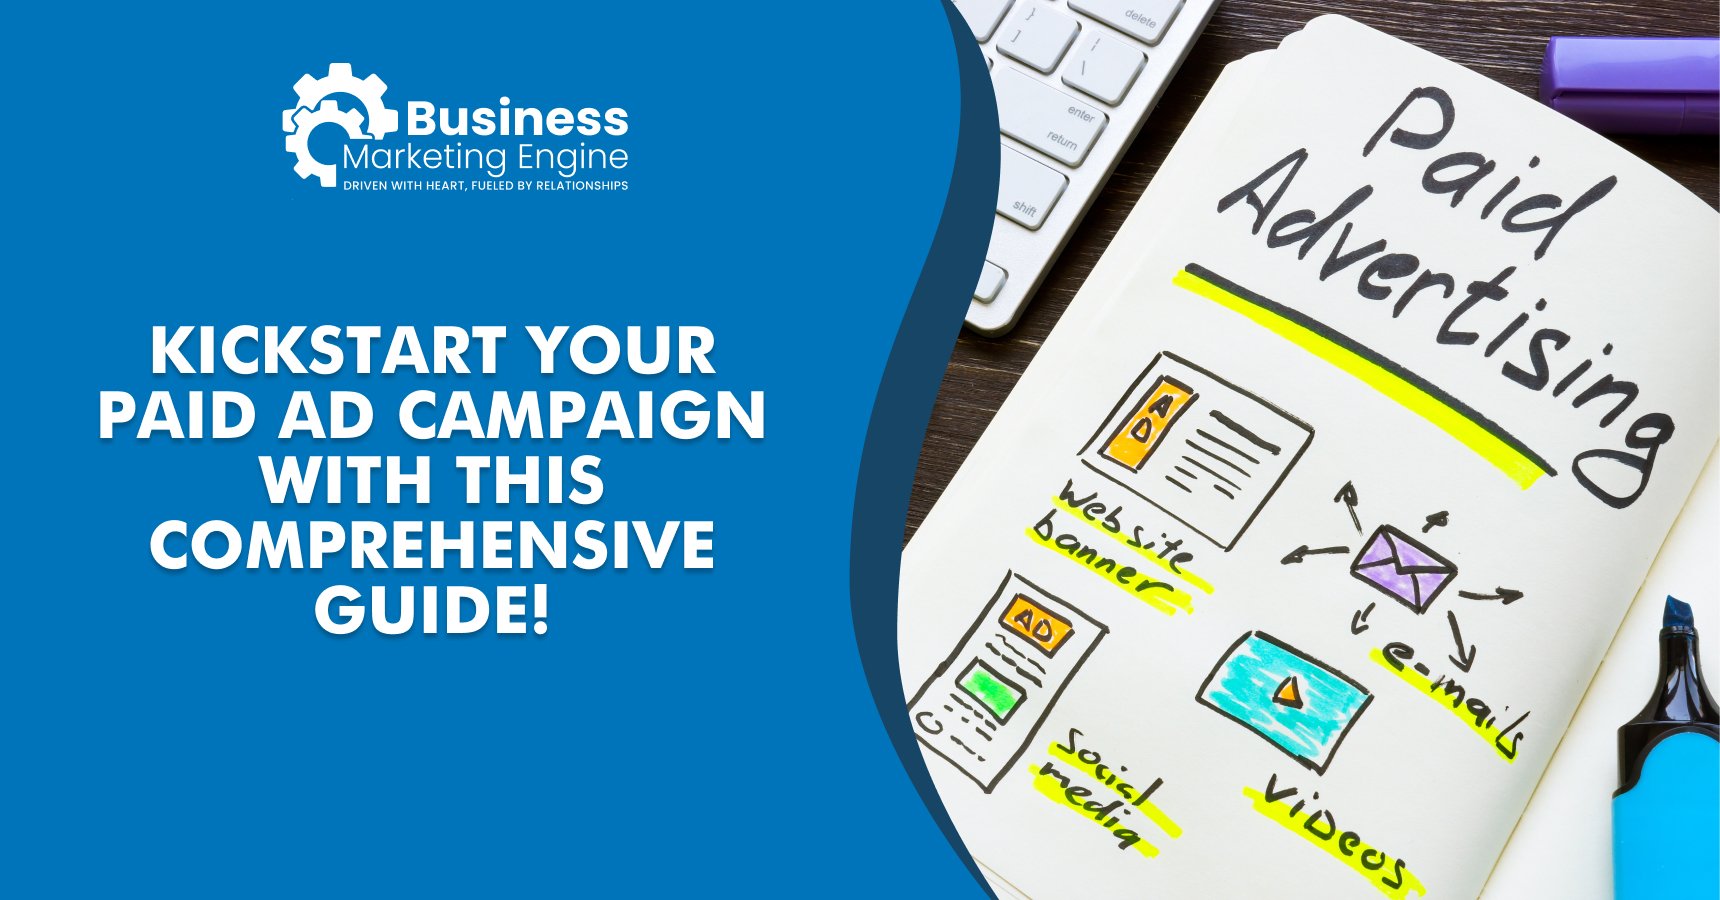 Kickstart your paid ad campaign with this comprehensive guide